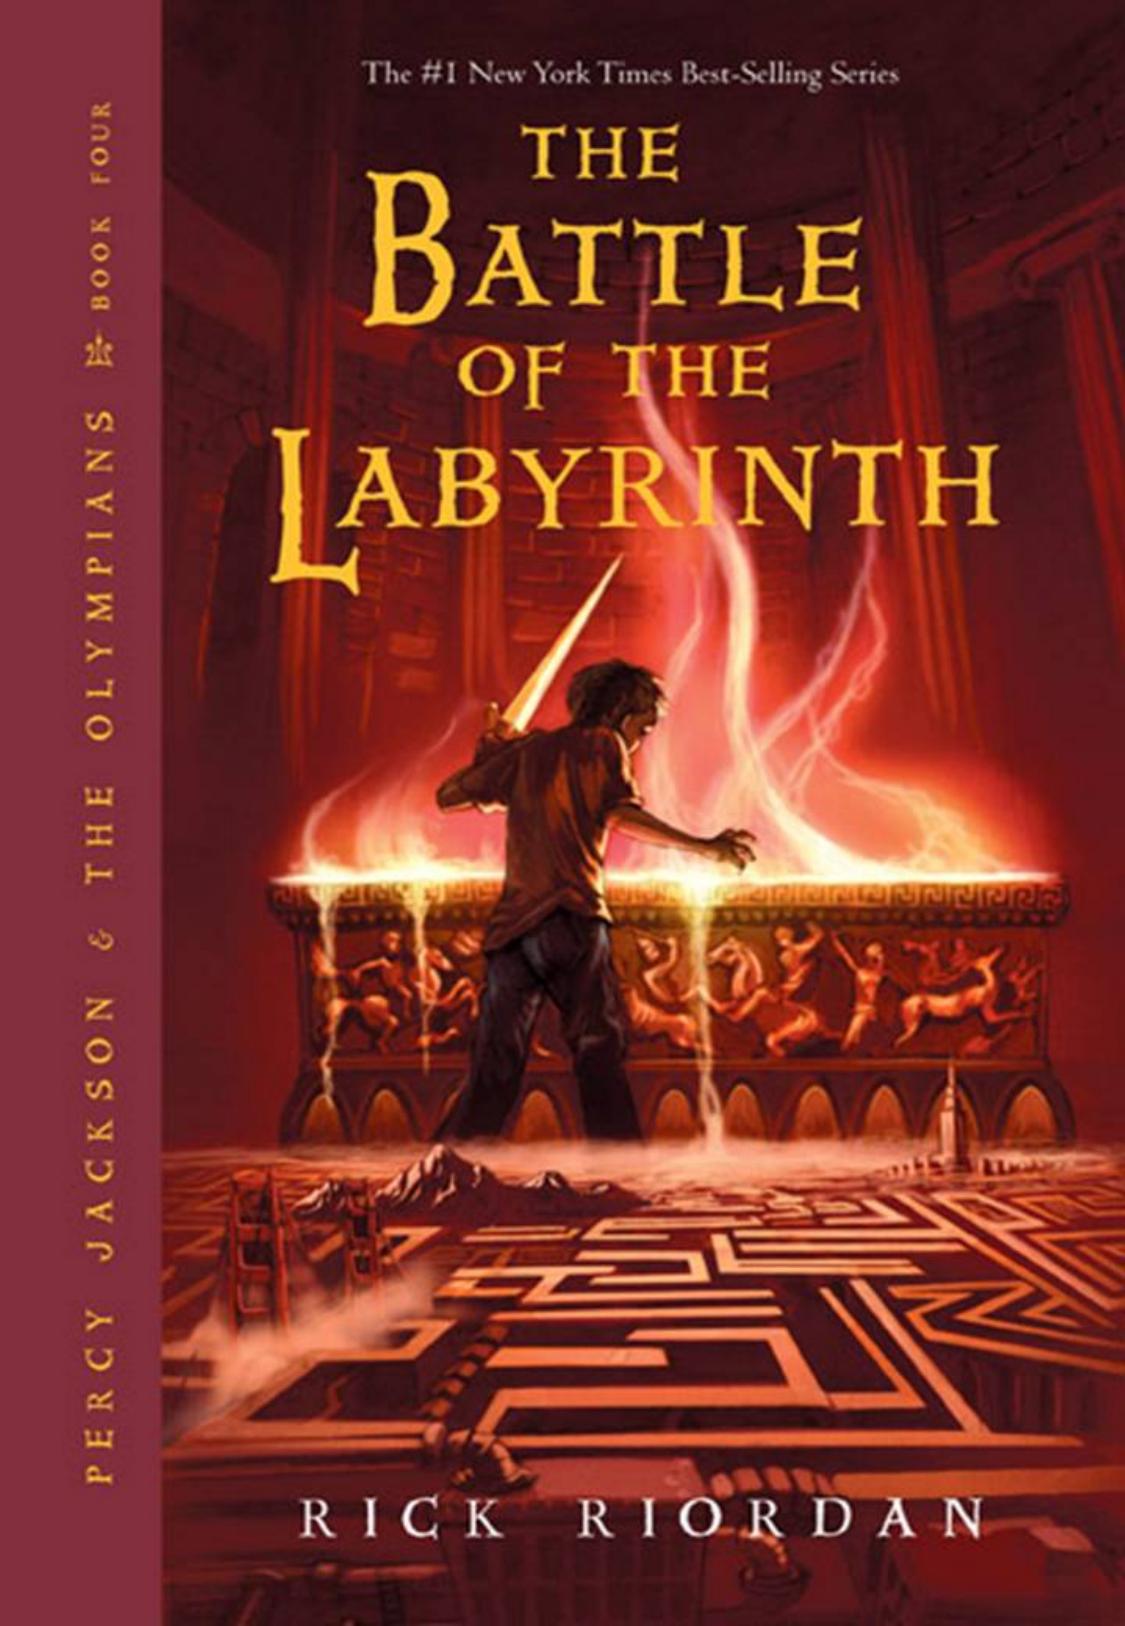 The Battle of the Labyrinth (Percy Jackson and the Olympians, Book 4) by Rick Riordan